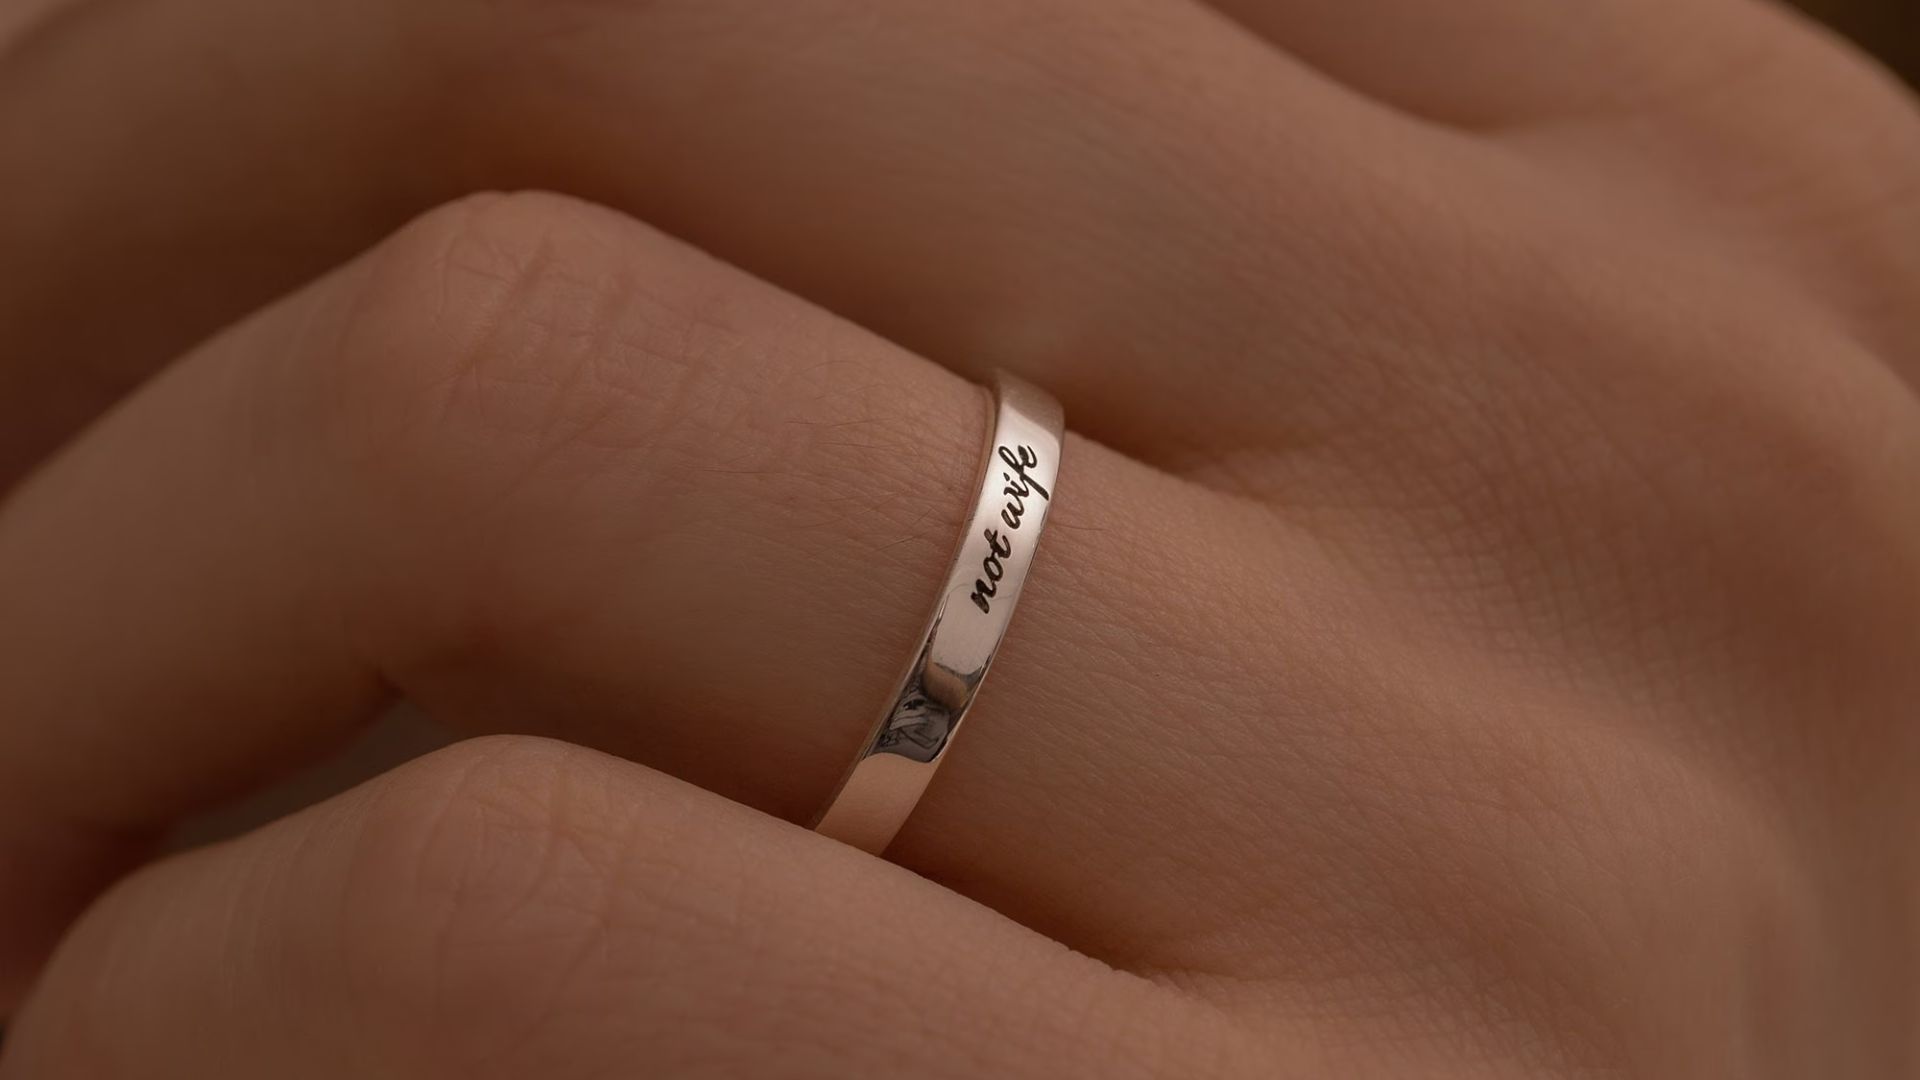 A Woman Wearing Ring With Engraved Design